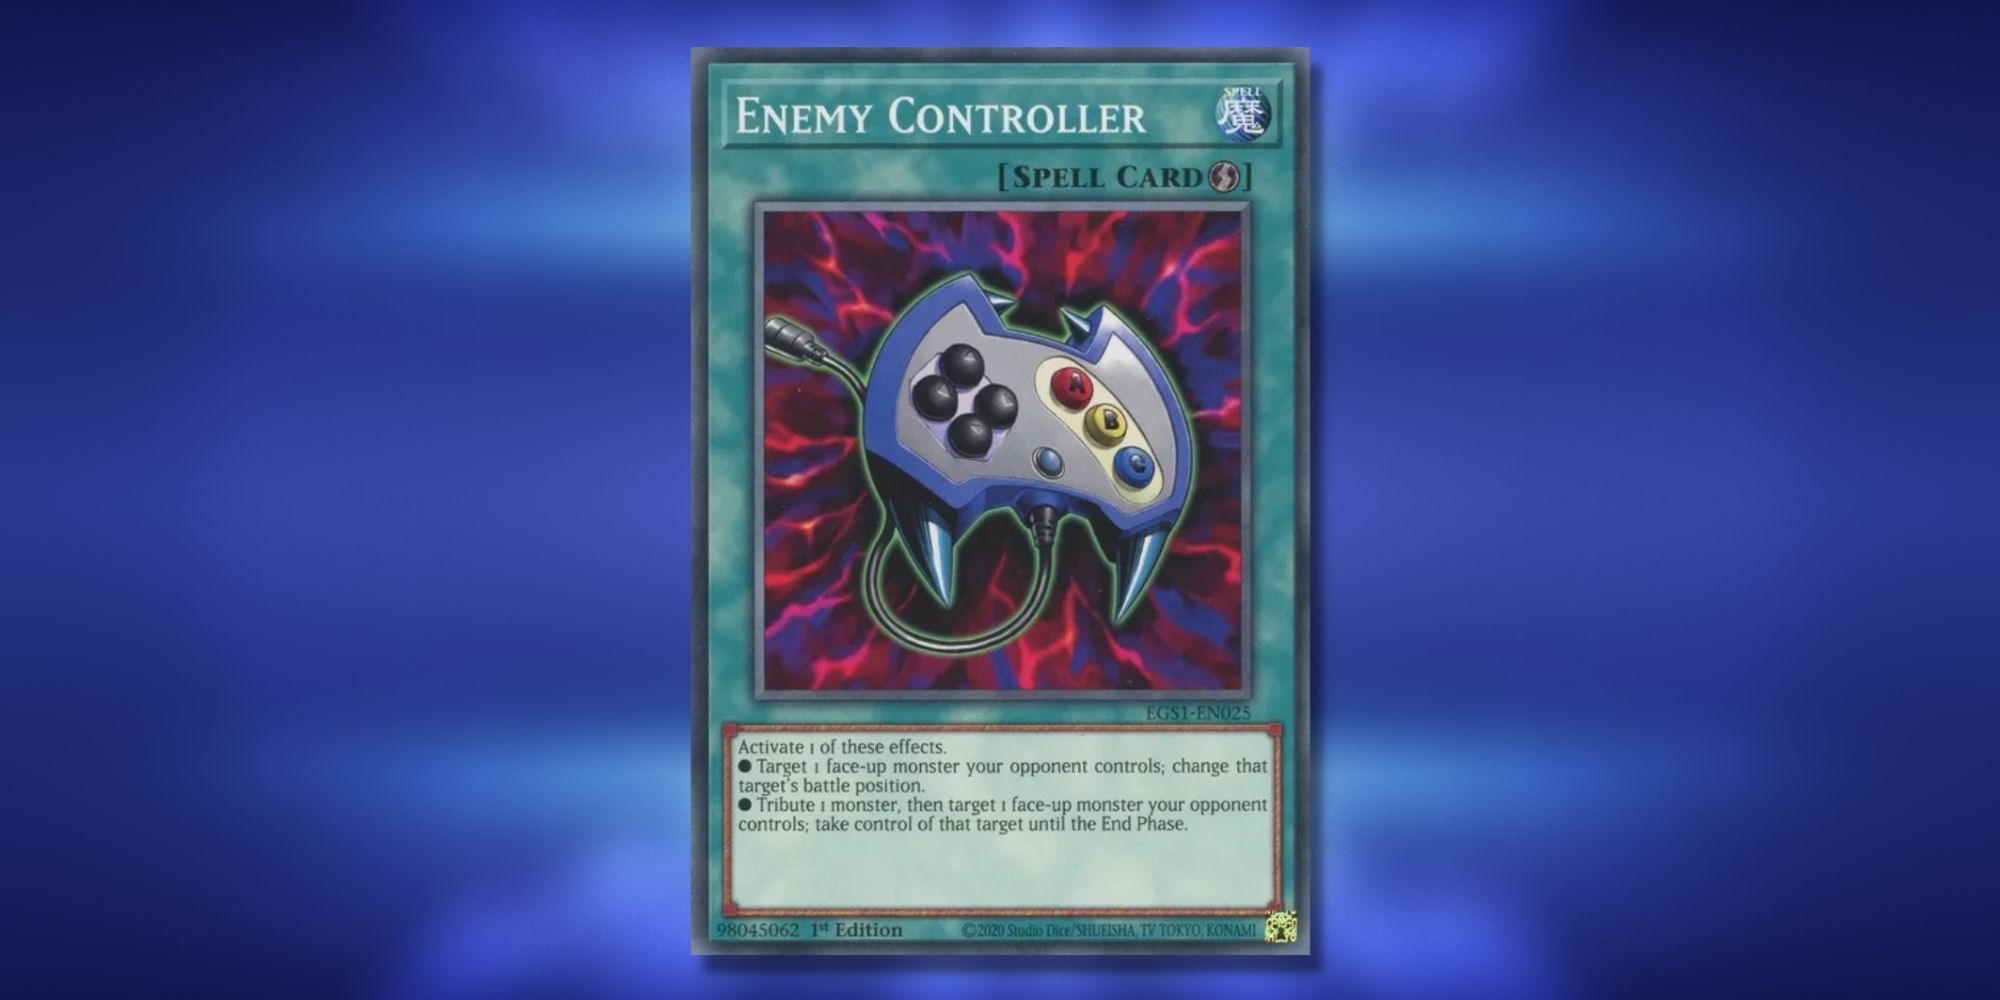 Yu-Gi-Oh card 'Enemy Controller' on a blurred blue background. Card depicts a video game controller on a red background.